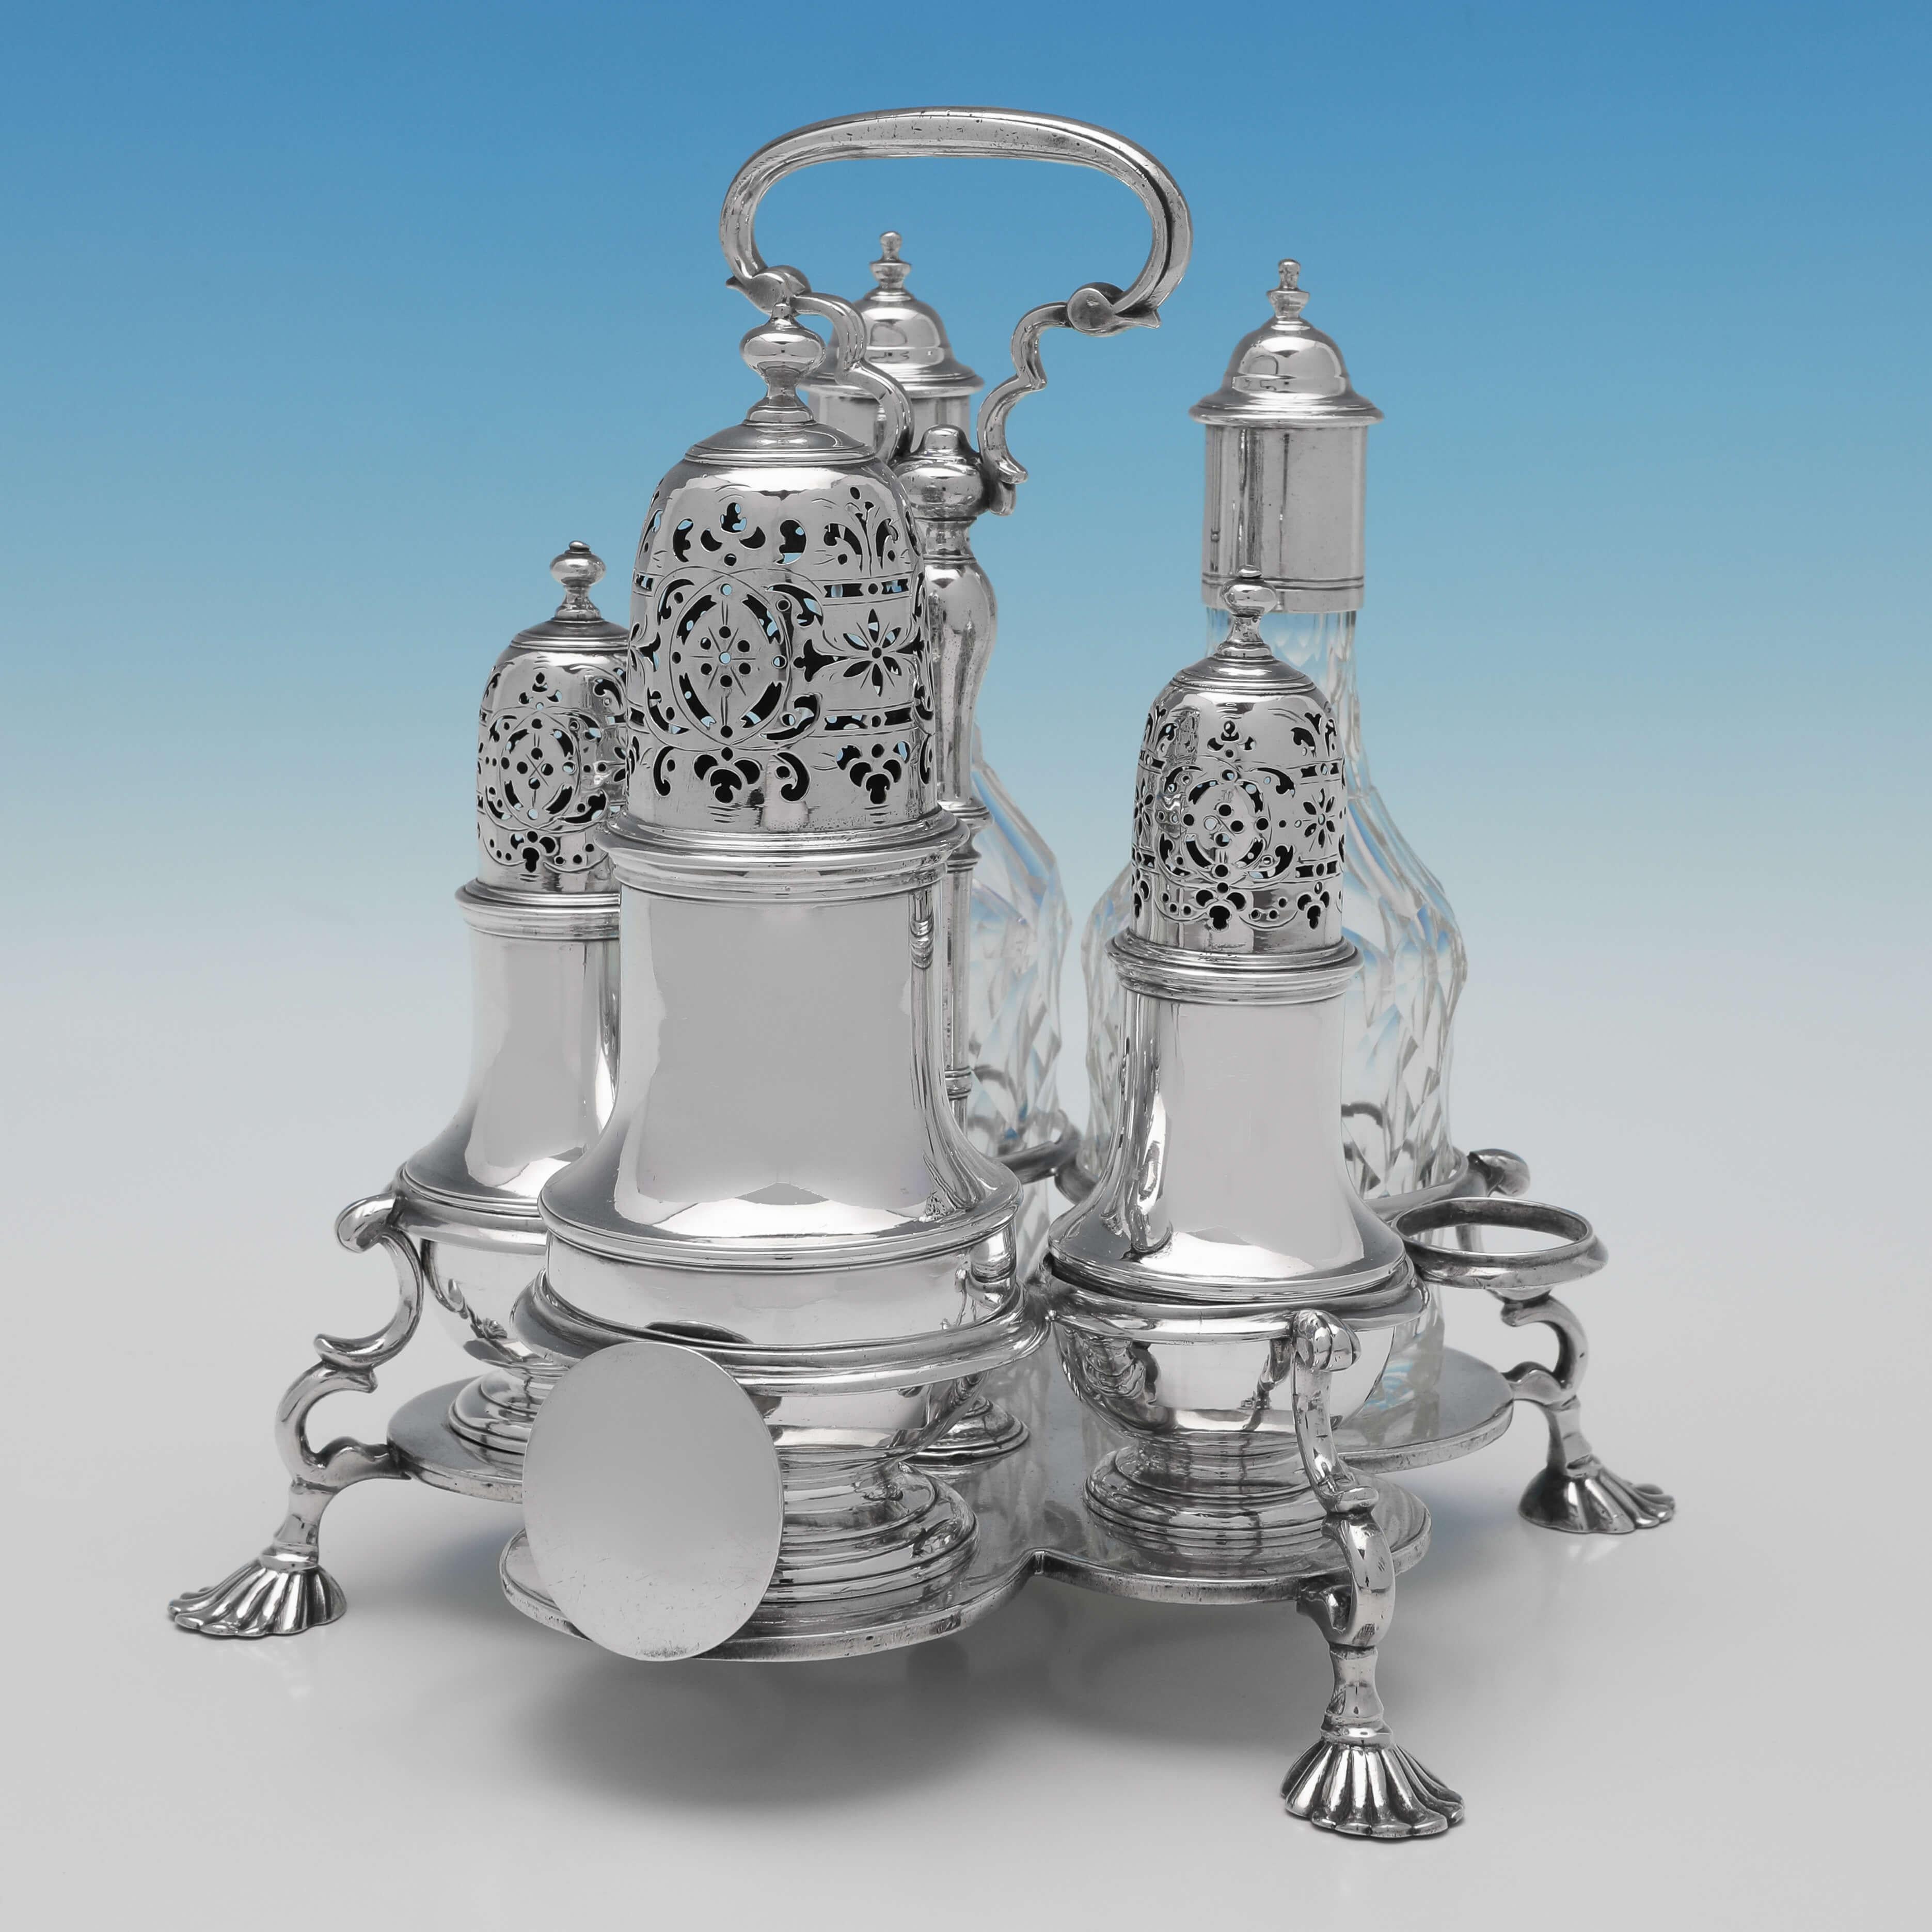 Hallmarked in London in 1726 by Thomas Bamford I, this magnificent, George I, Antique Sterling Silver Warwick Cruet, comprises two oil bottles, two pepper pots and a sugar caster, all fitted to a scroll detailed frame which stands on four cast shell